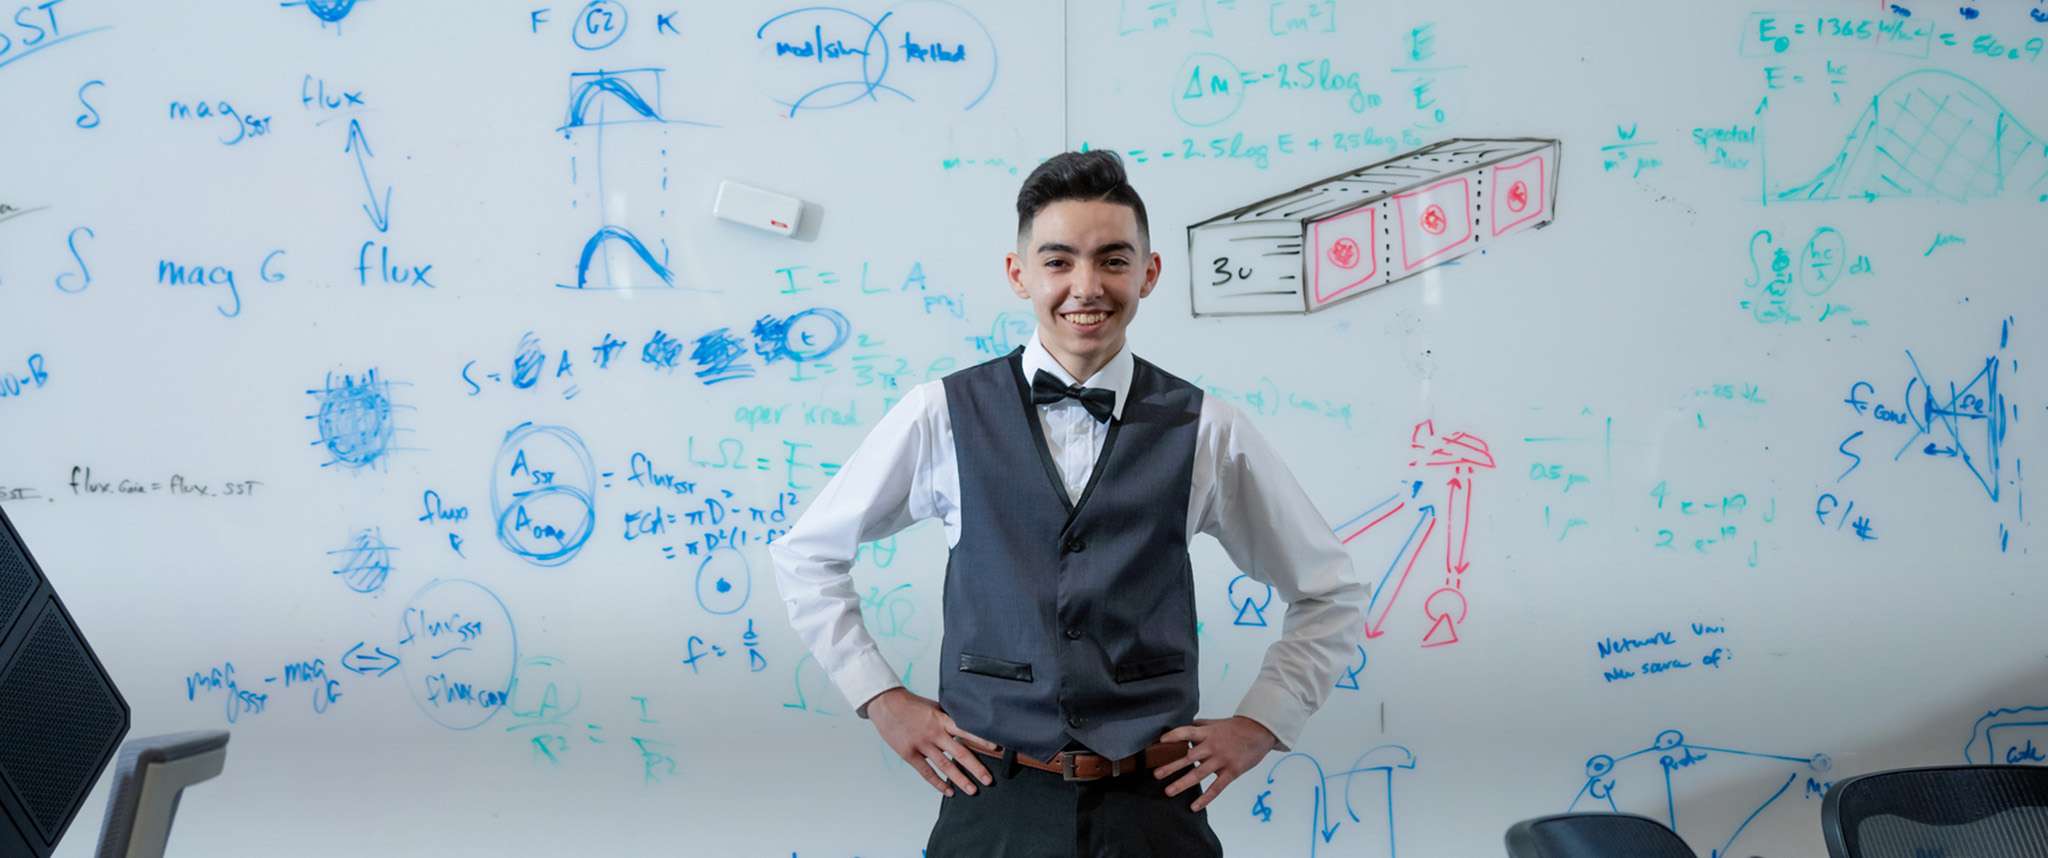 Increasing diversity in STEM is at the core of Aerospace’s outreach initiatives. Programs like the Dr. Wanda M. Austin STEM Scholarship aim to support promising students like 2021 recipient Antonio Garcia.